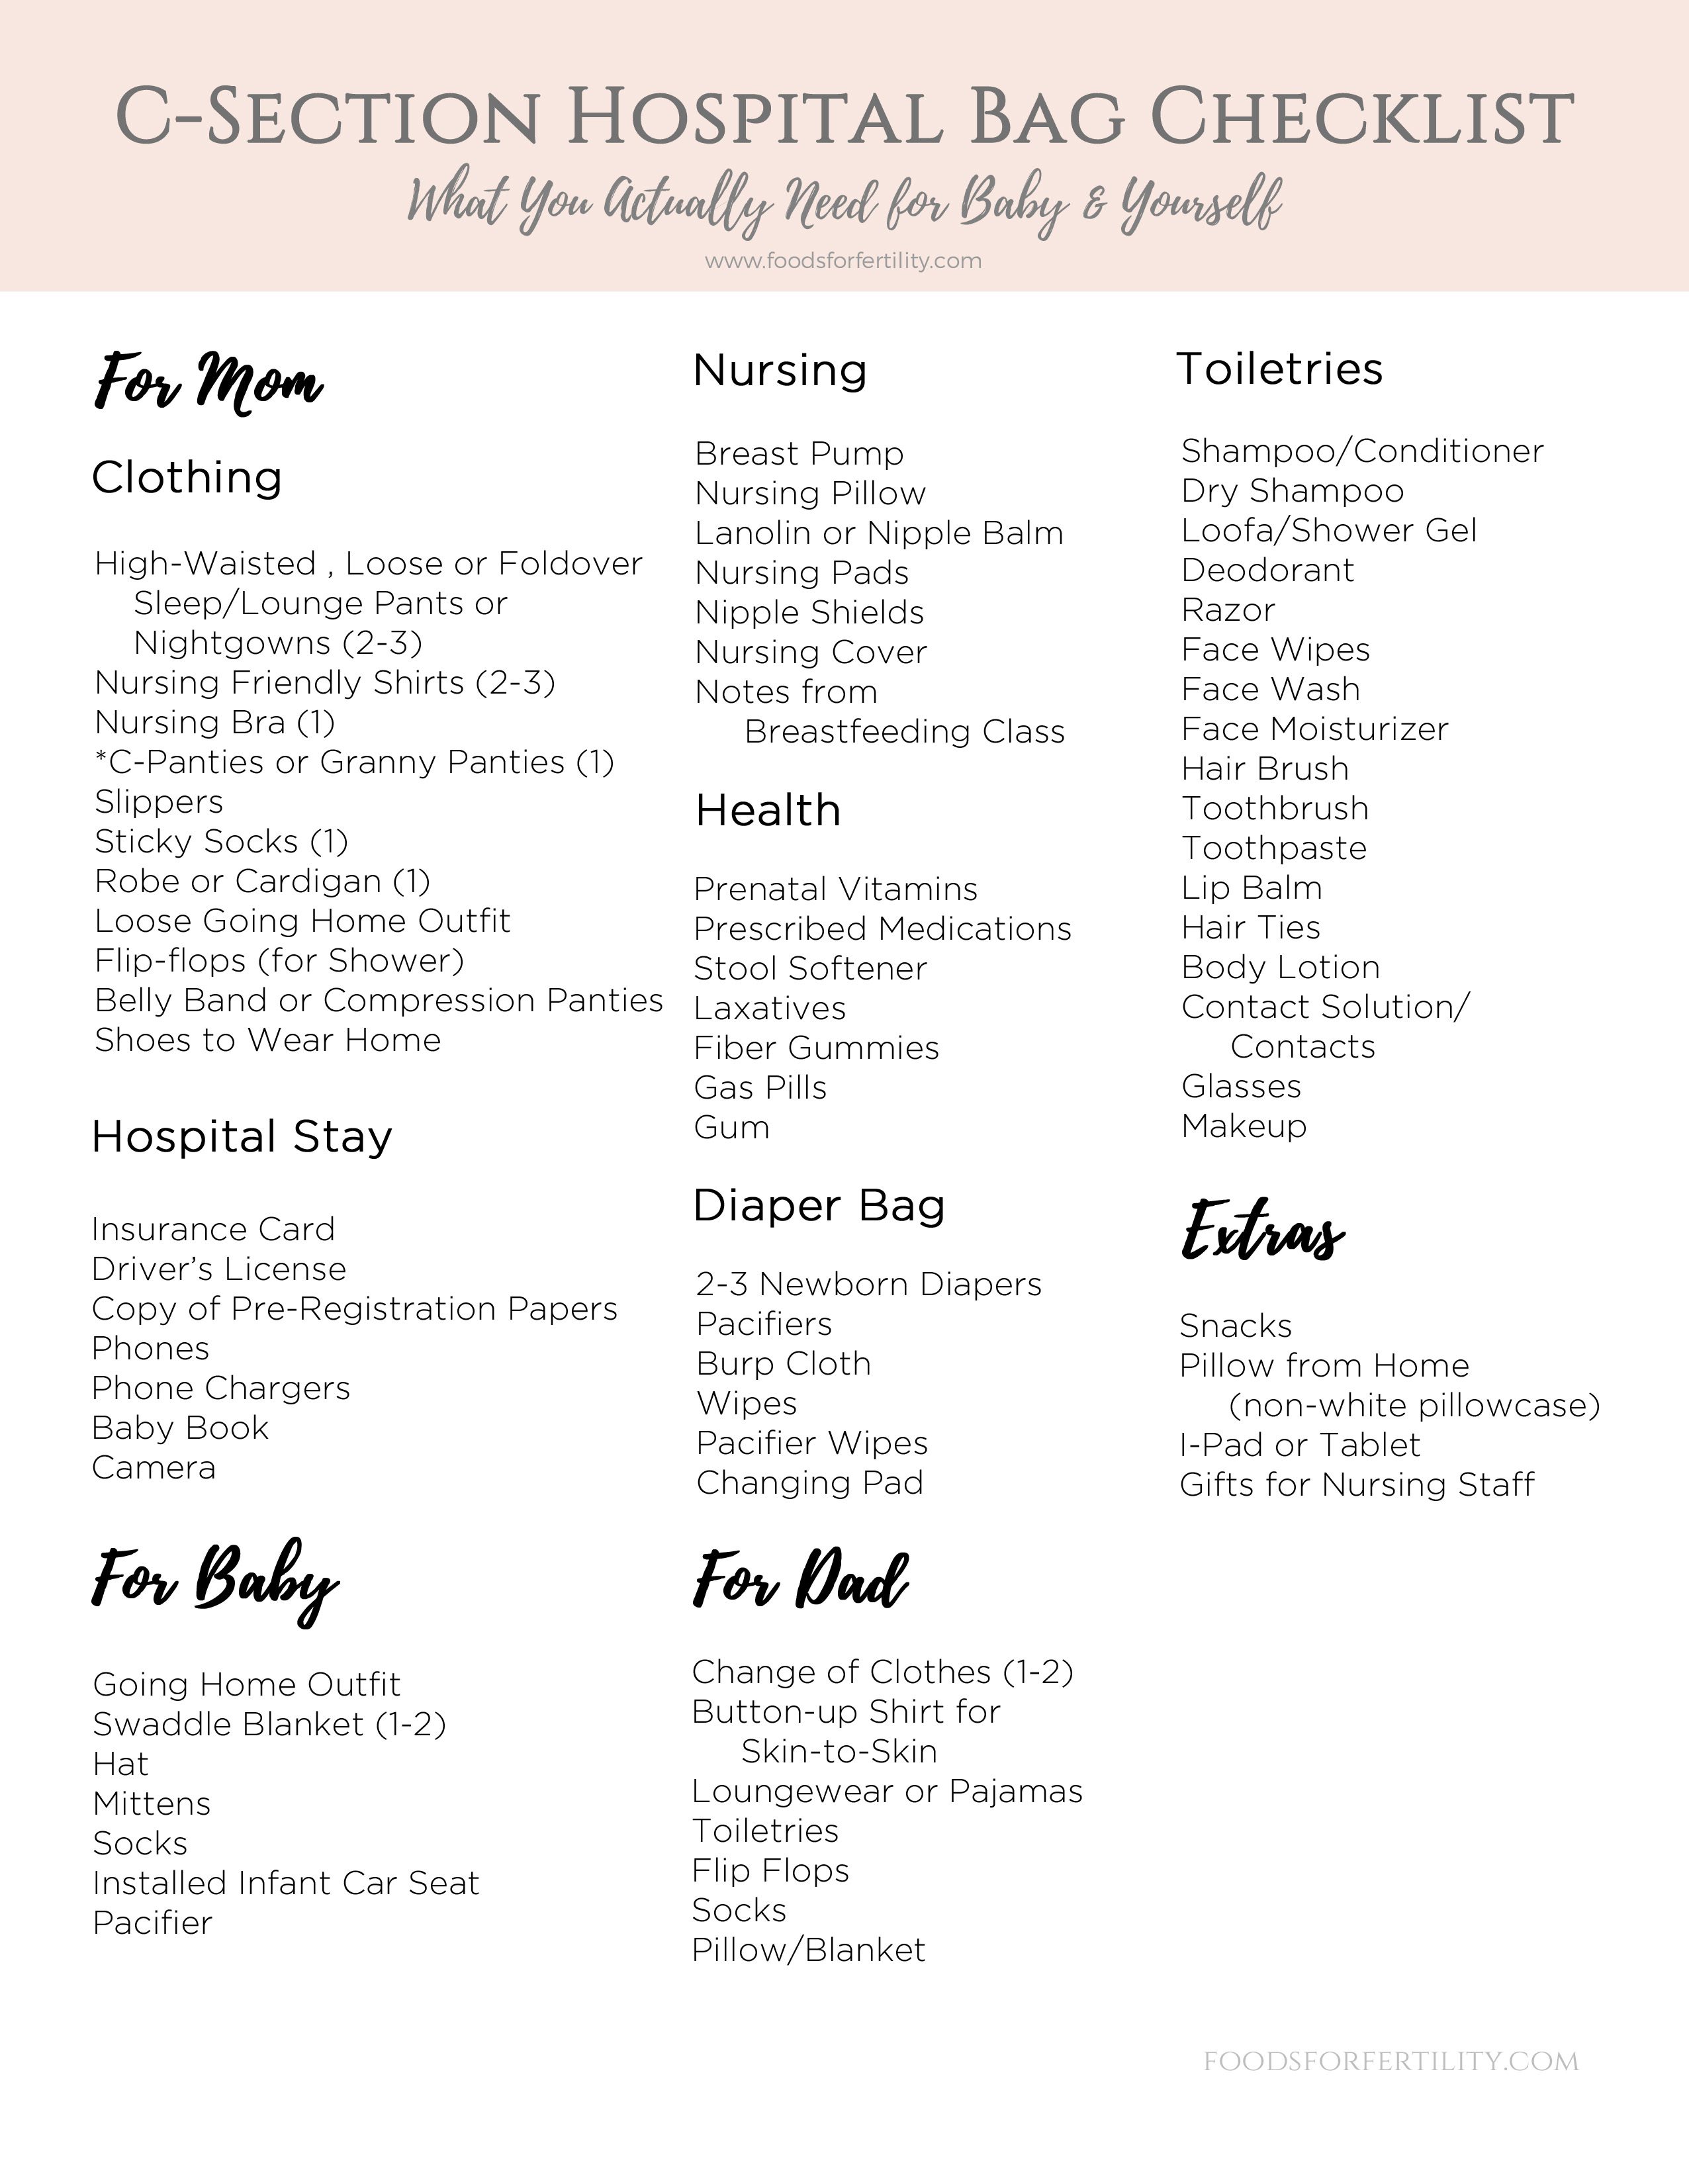 https://foodsforfertility.com/wp-content/uploads/2019/04/hospital-bag-checklist-for-c-section-what-to-pack-in-your-hospital-bag-pdf.jpg